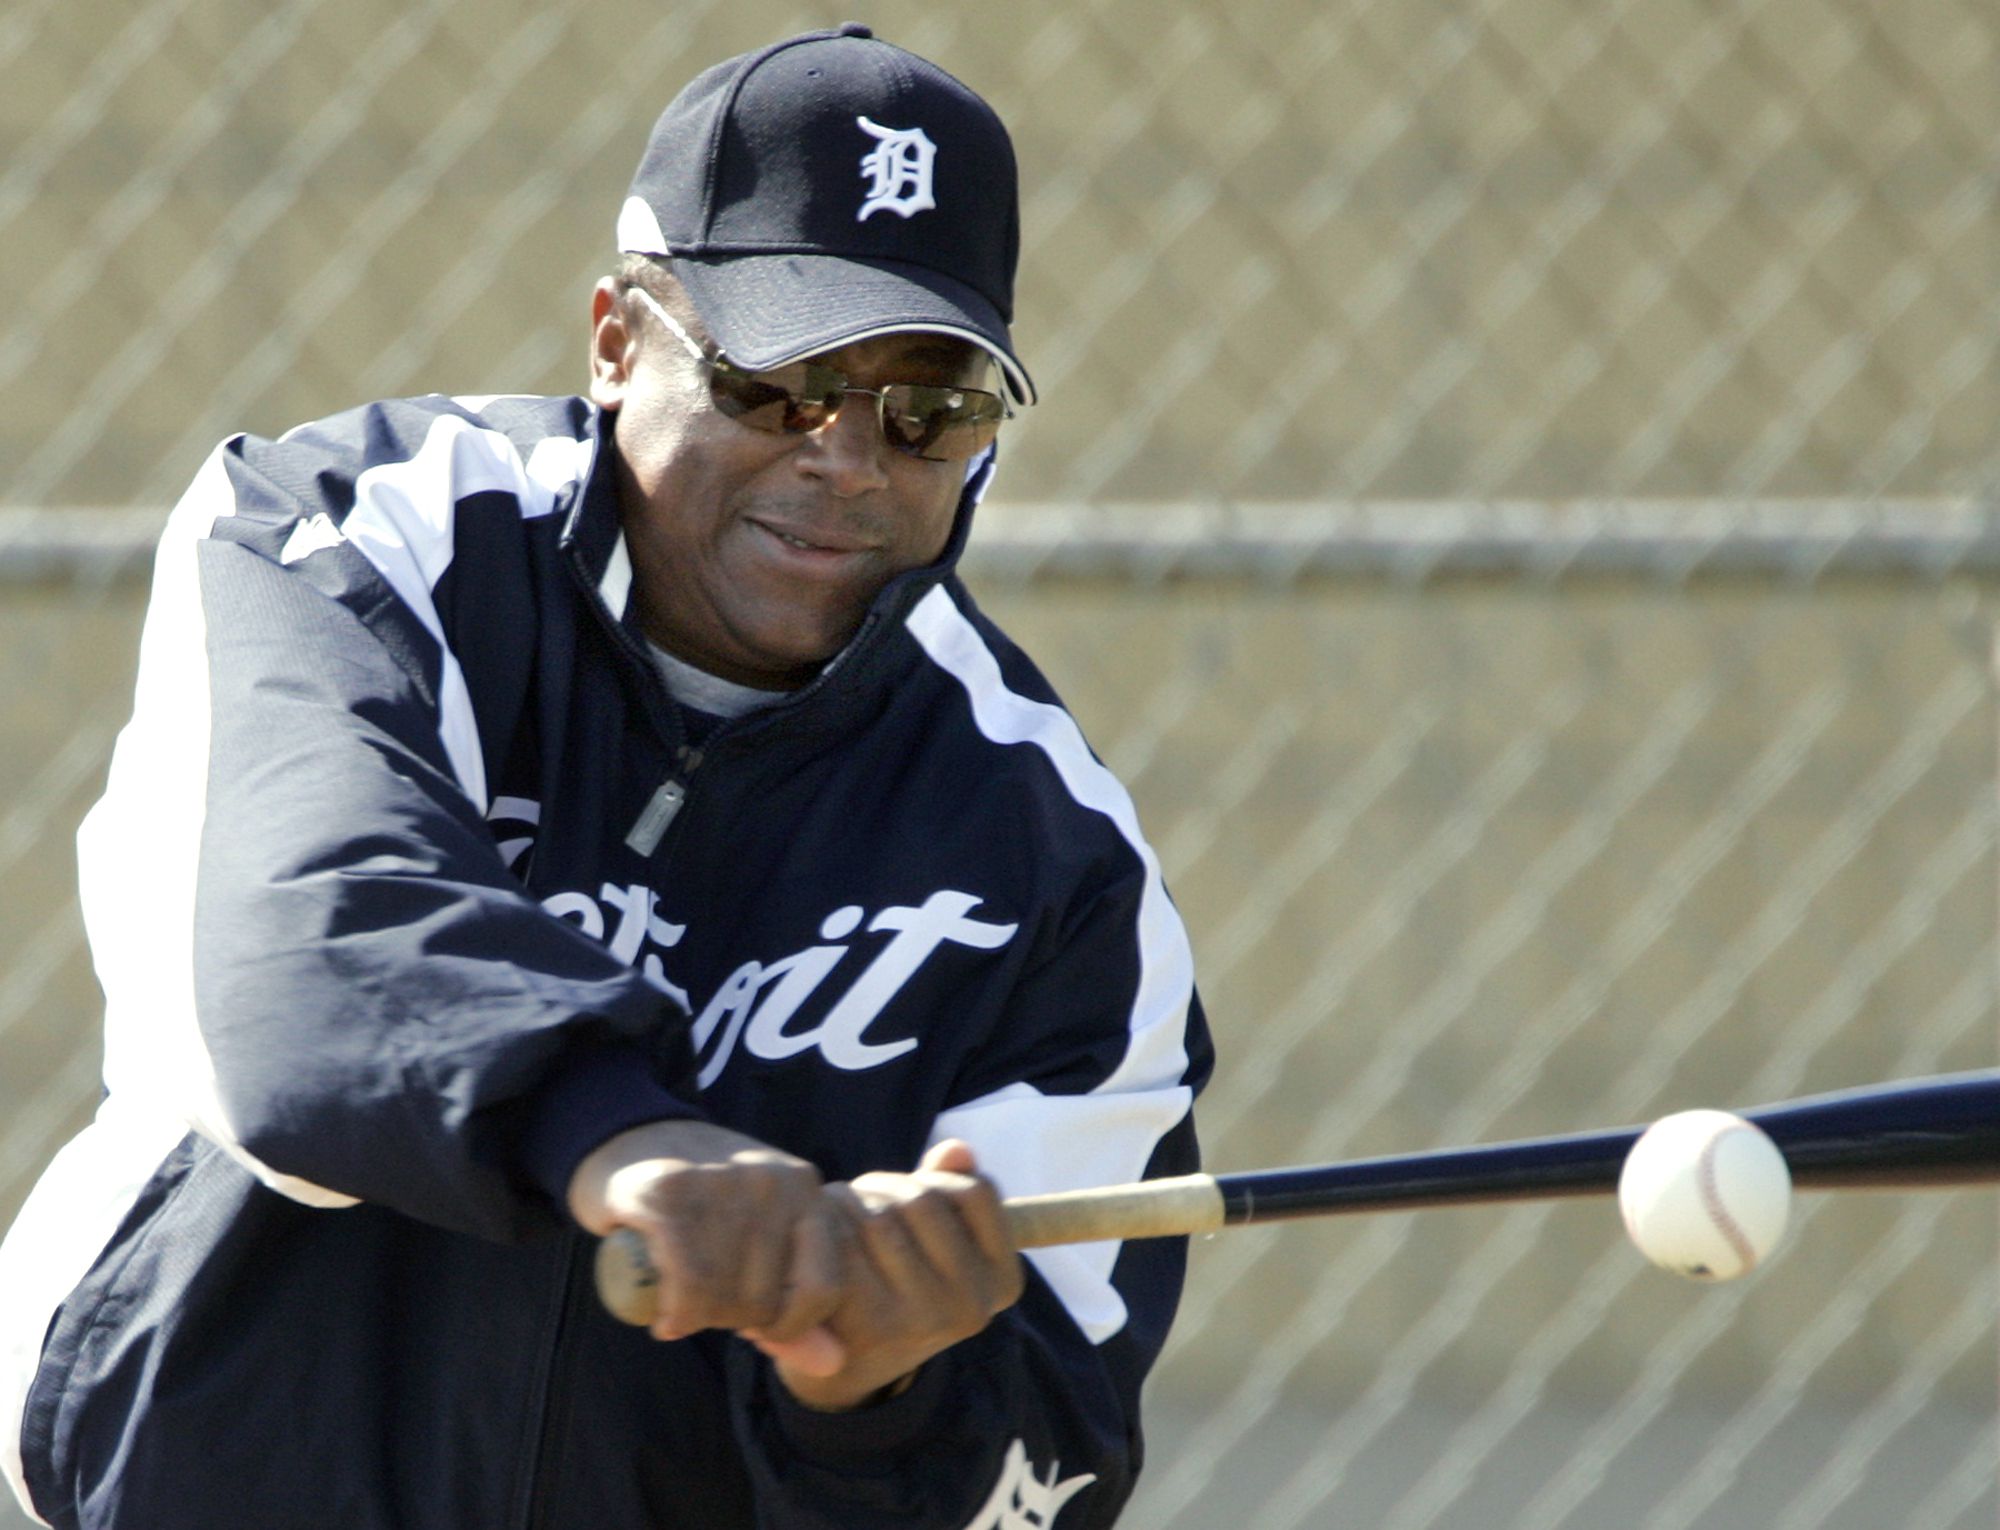 Lou Whitaker falls short in Hall of Fame vote; Ted Simmons